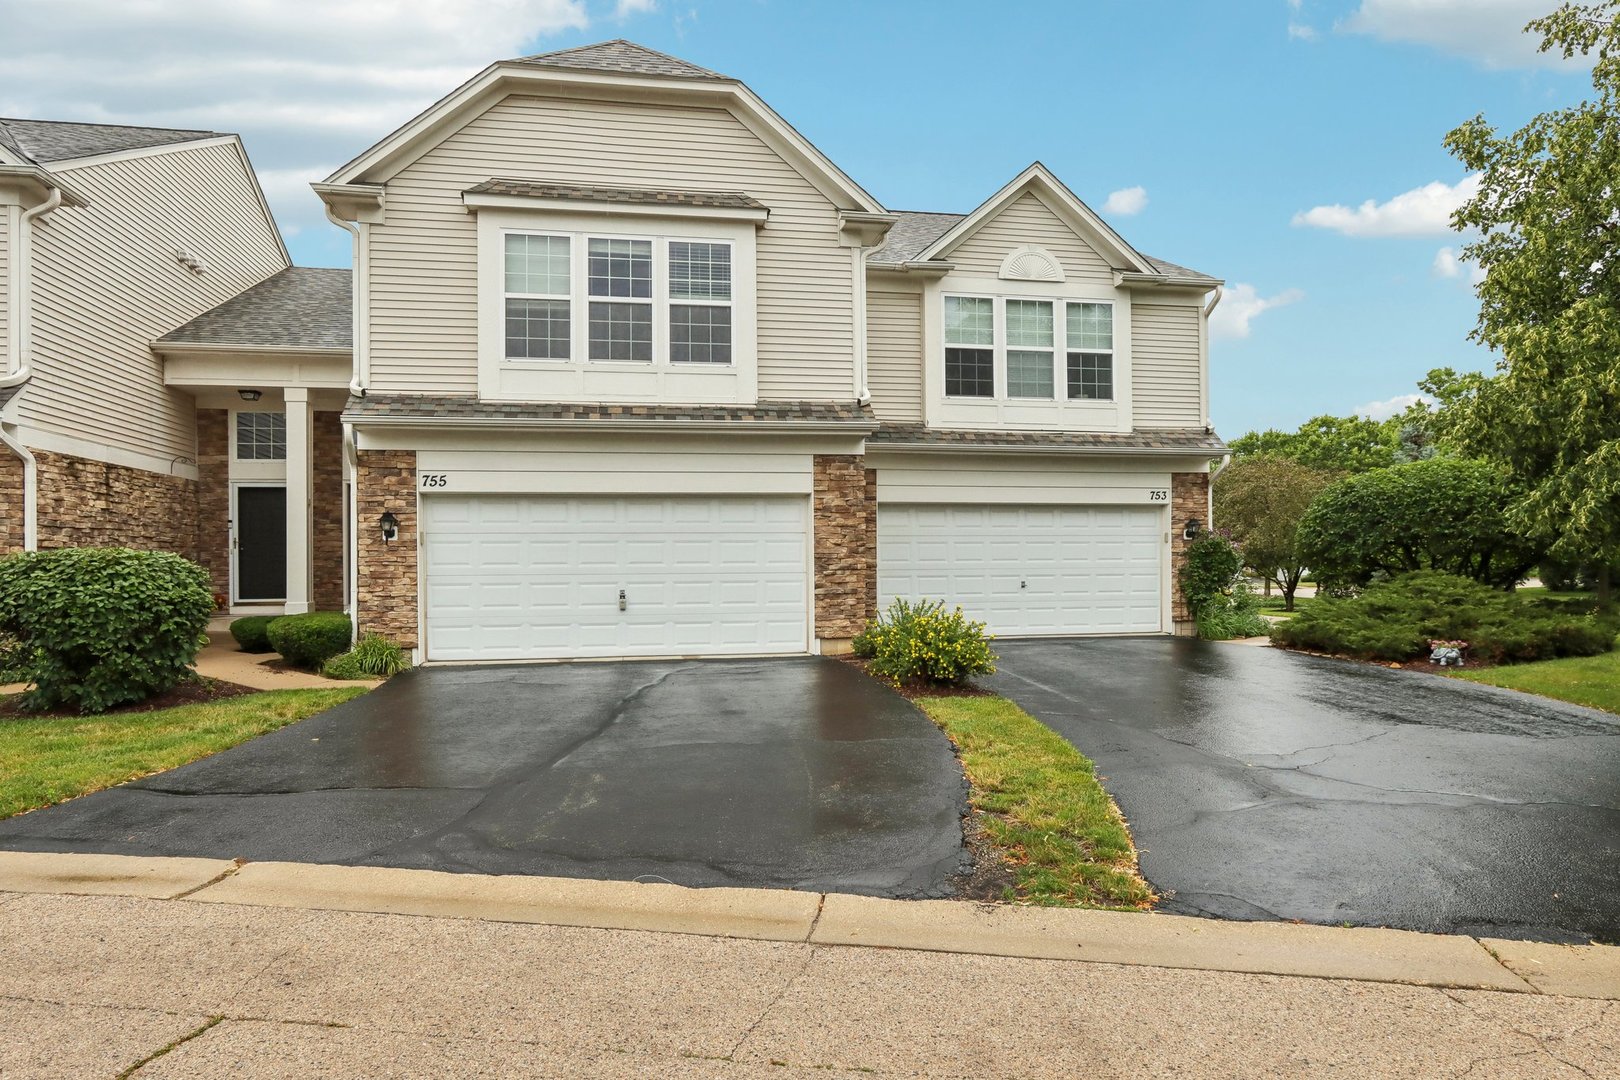 View Crystal Lake, IL 60014 townhome